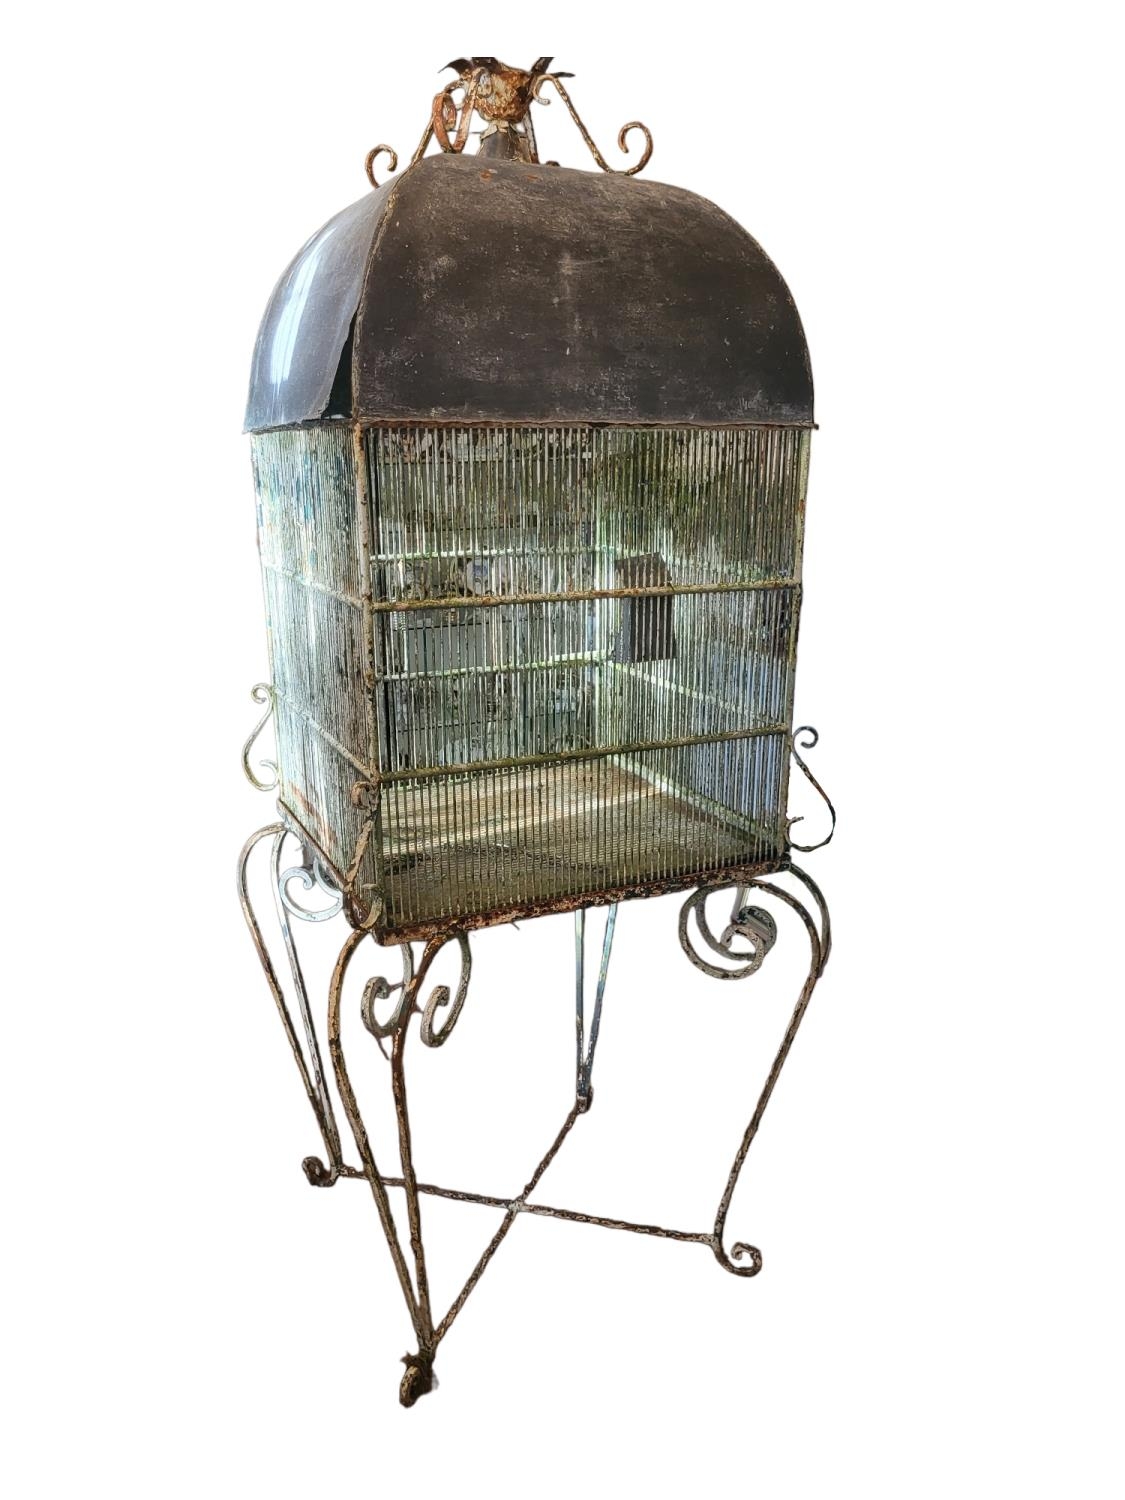 A LARGE 19TH CENTURY PAINTED IRON AND ZINC DOMED TOPPED BIRDCAGE ON WROUGHT IRON SCROLL WORK - Image 2 of 2